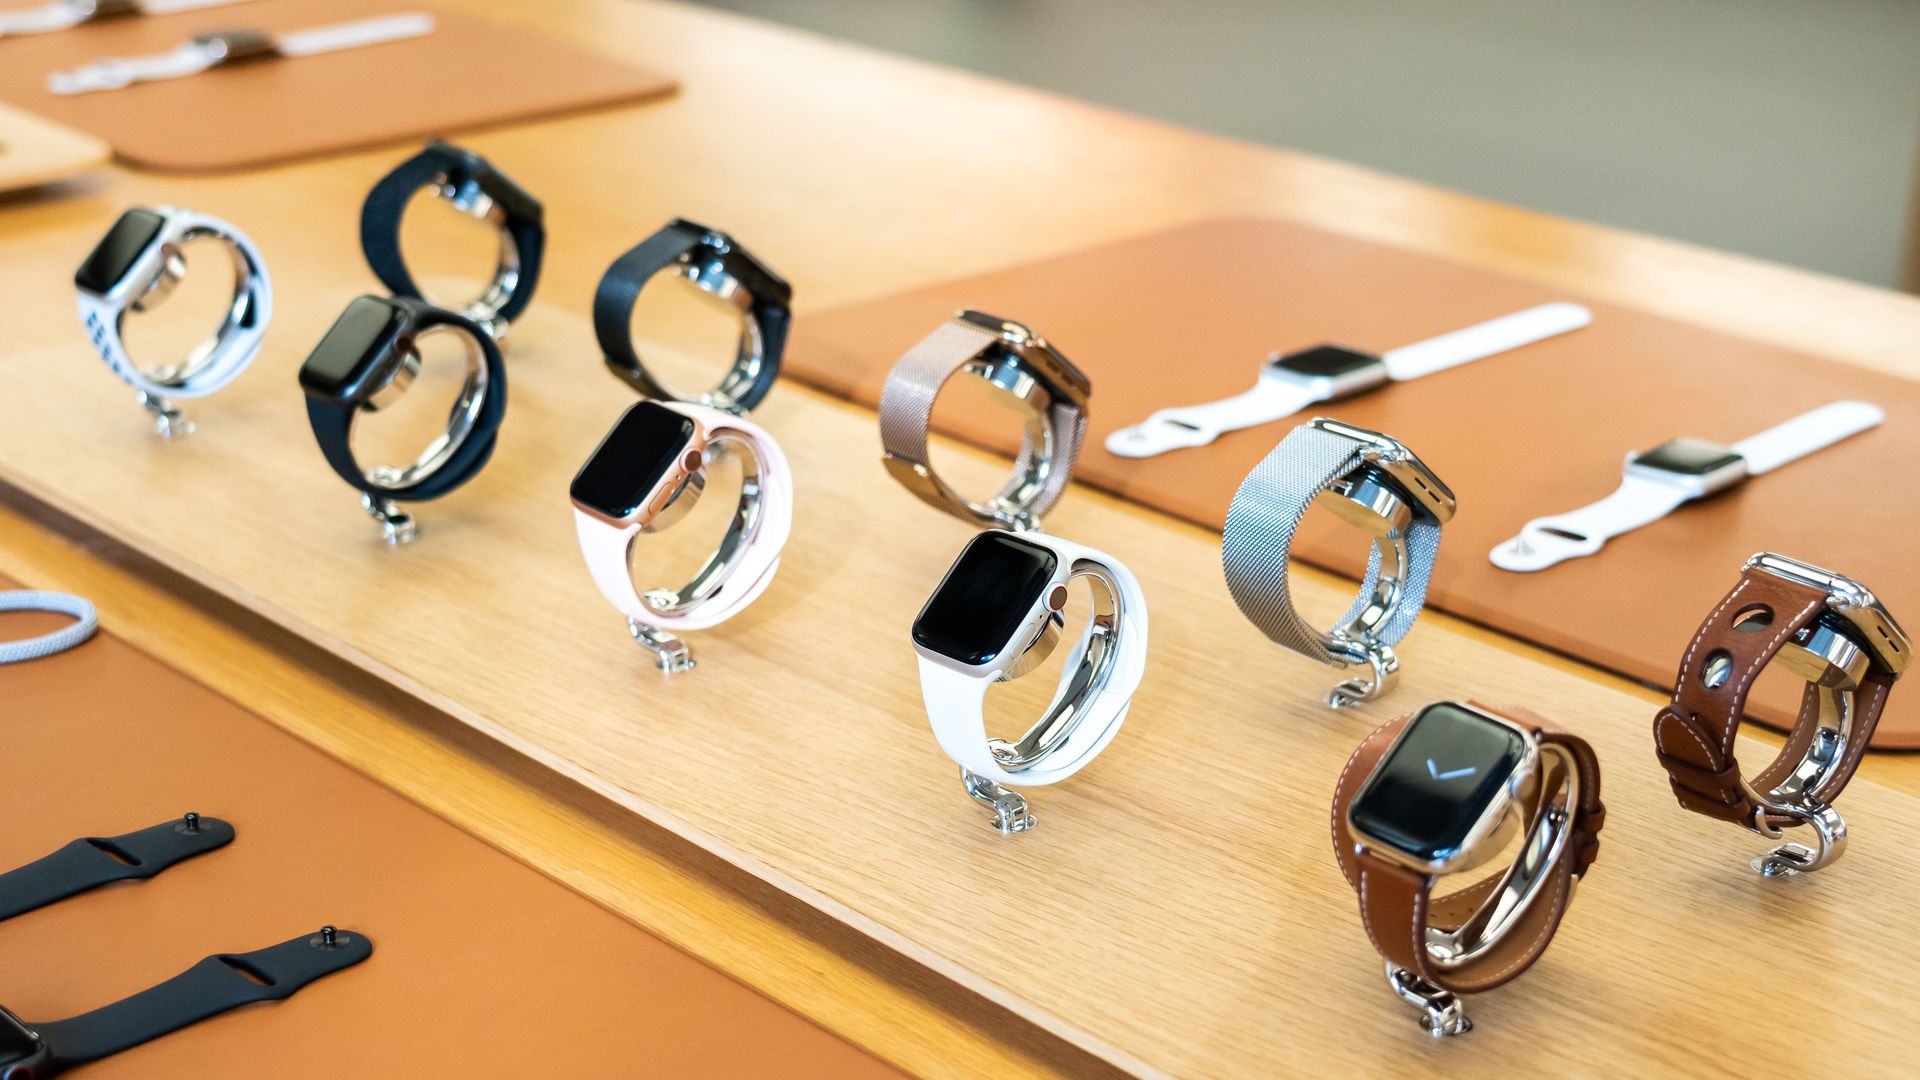 Apple watches